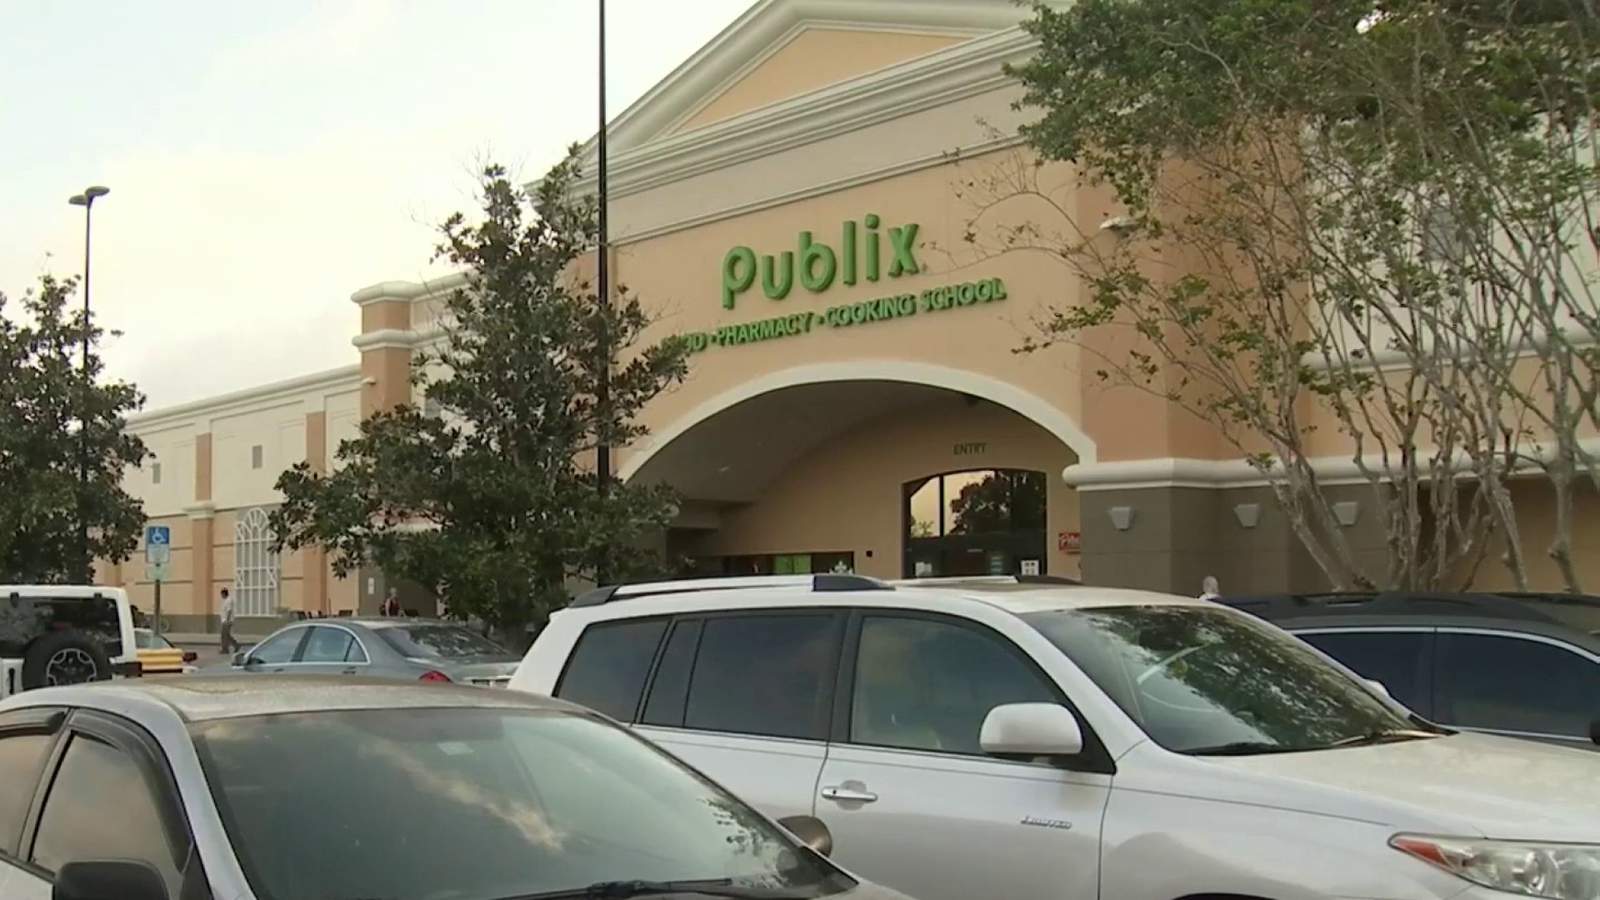 Publix Designates Shopping Hours For First Responders Health Care